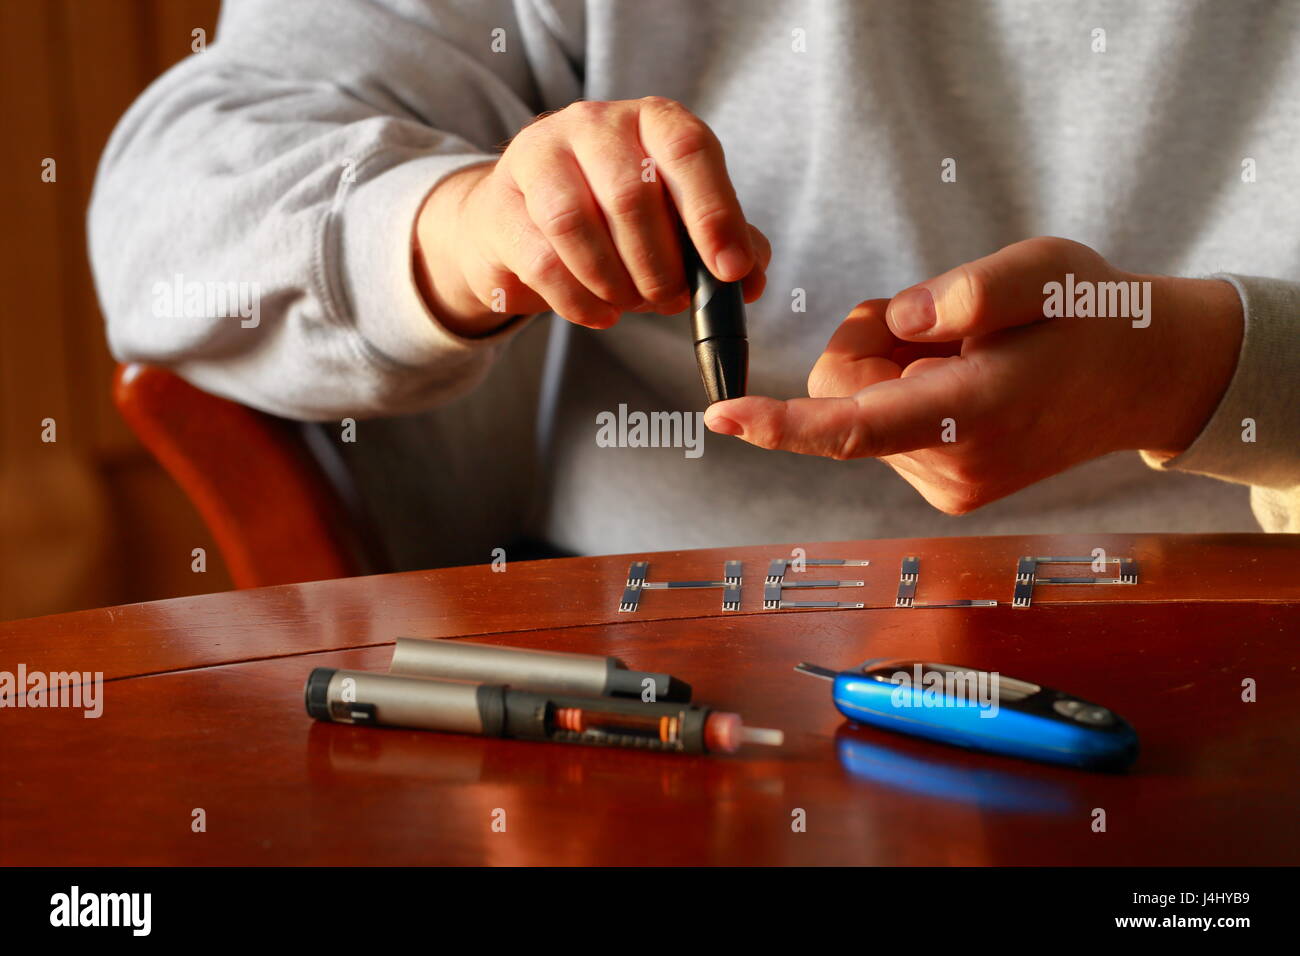 Diabetes. Blood glucose meter. Adult man measuring sugar level in blood at the table. Stock Photo